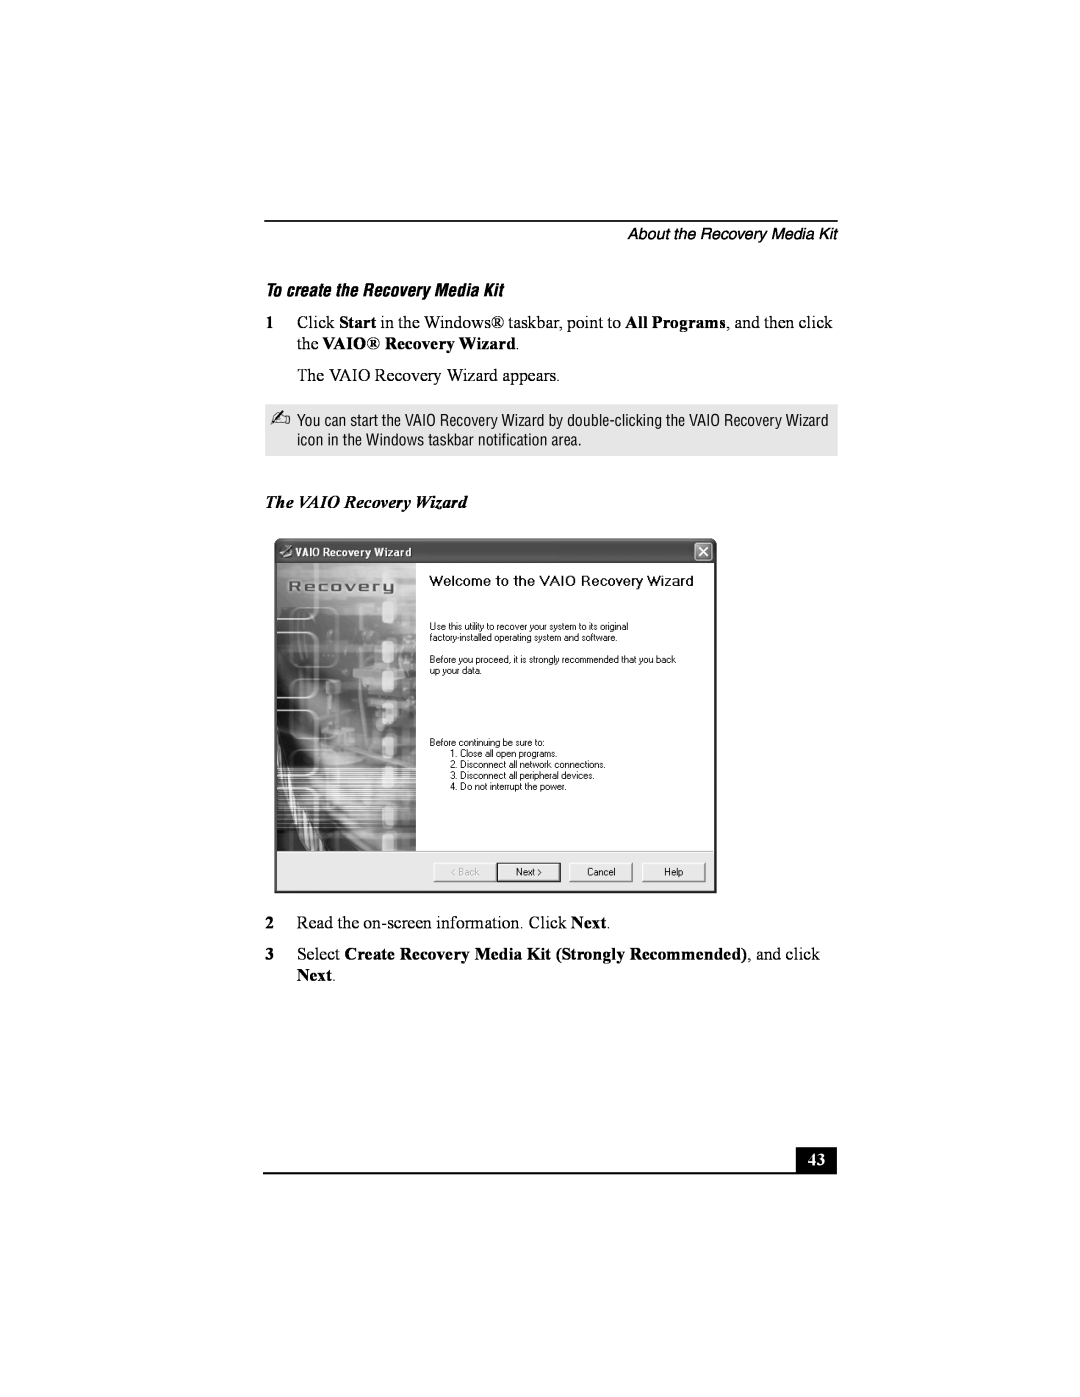 Sony PCG-FRV manual To create the Recovery Media Kit, The VAIO Recovery Wizard, About the Recovery Media Kit 